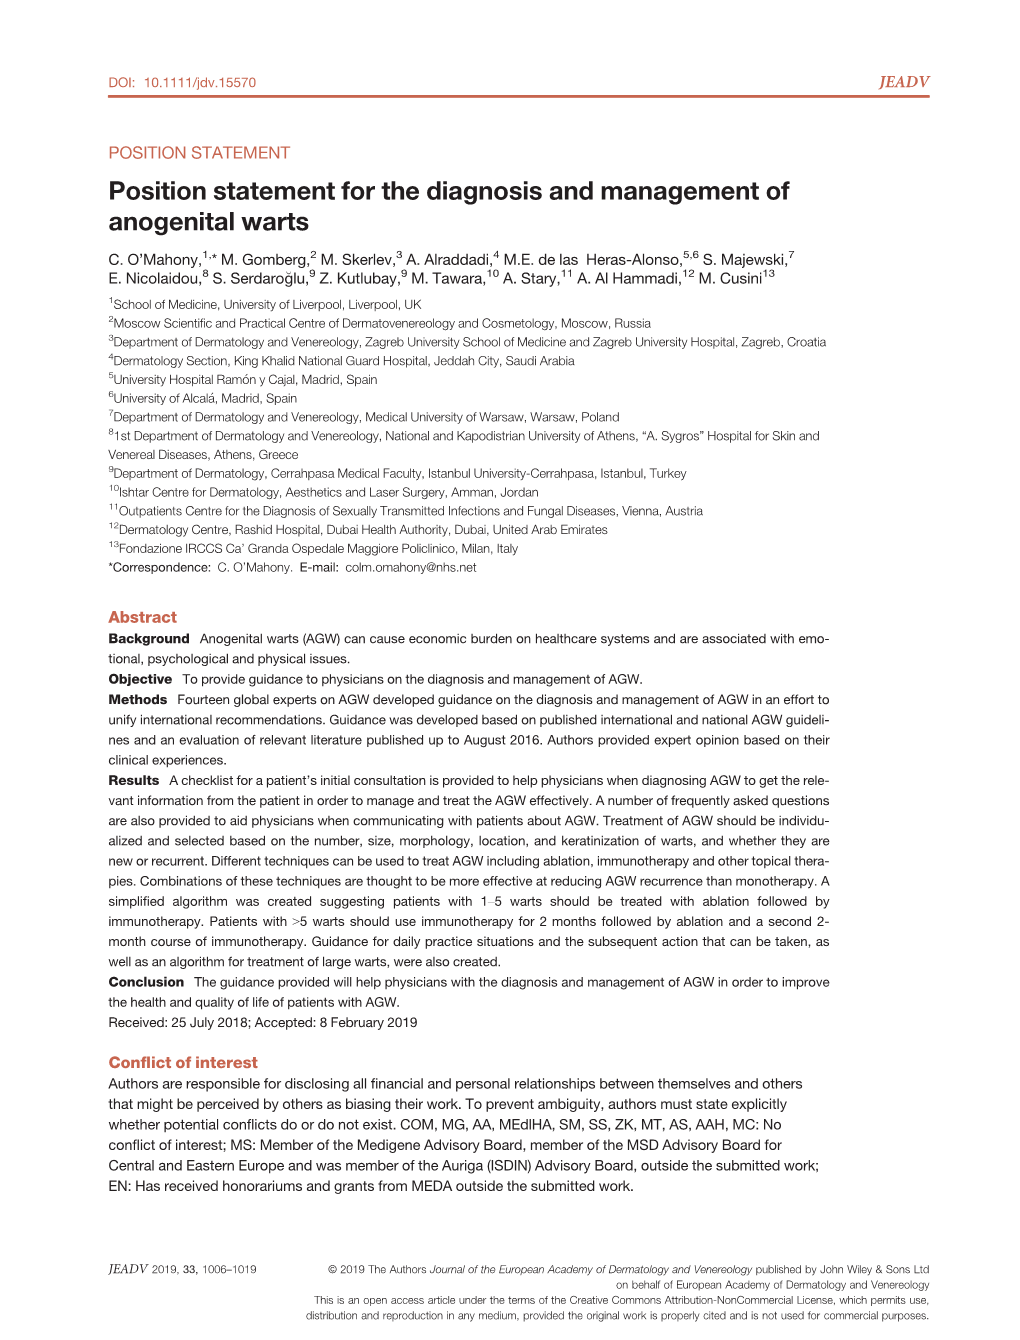 Position Statement for the Diagnosis and Management of Anogenital Warts